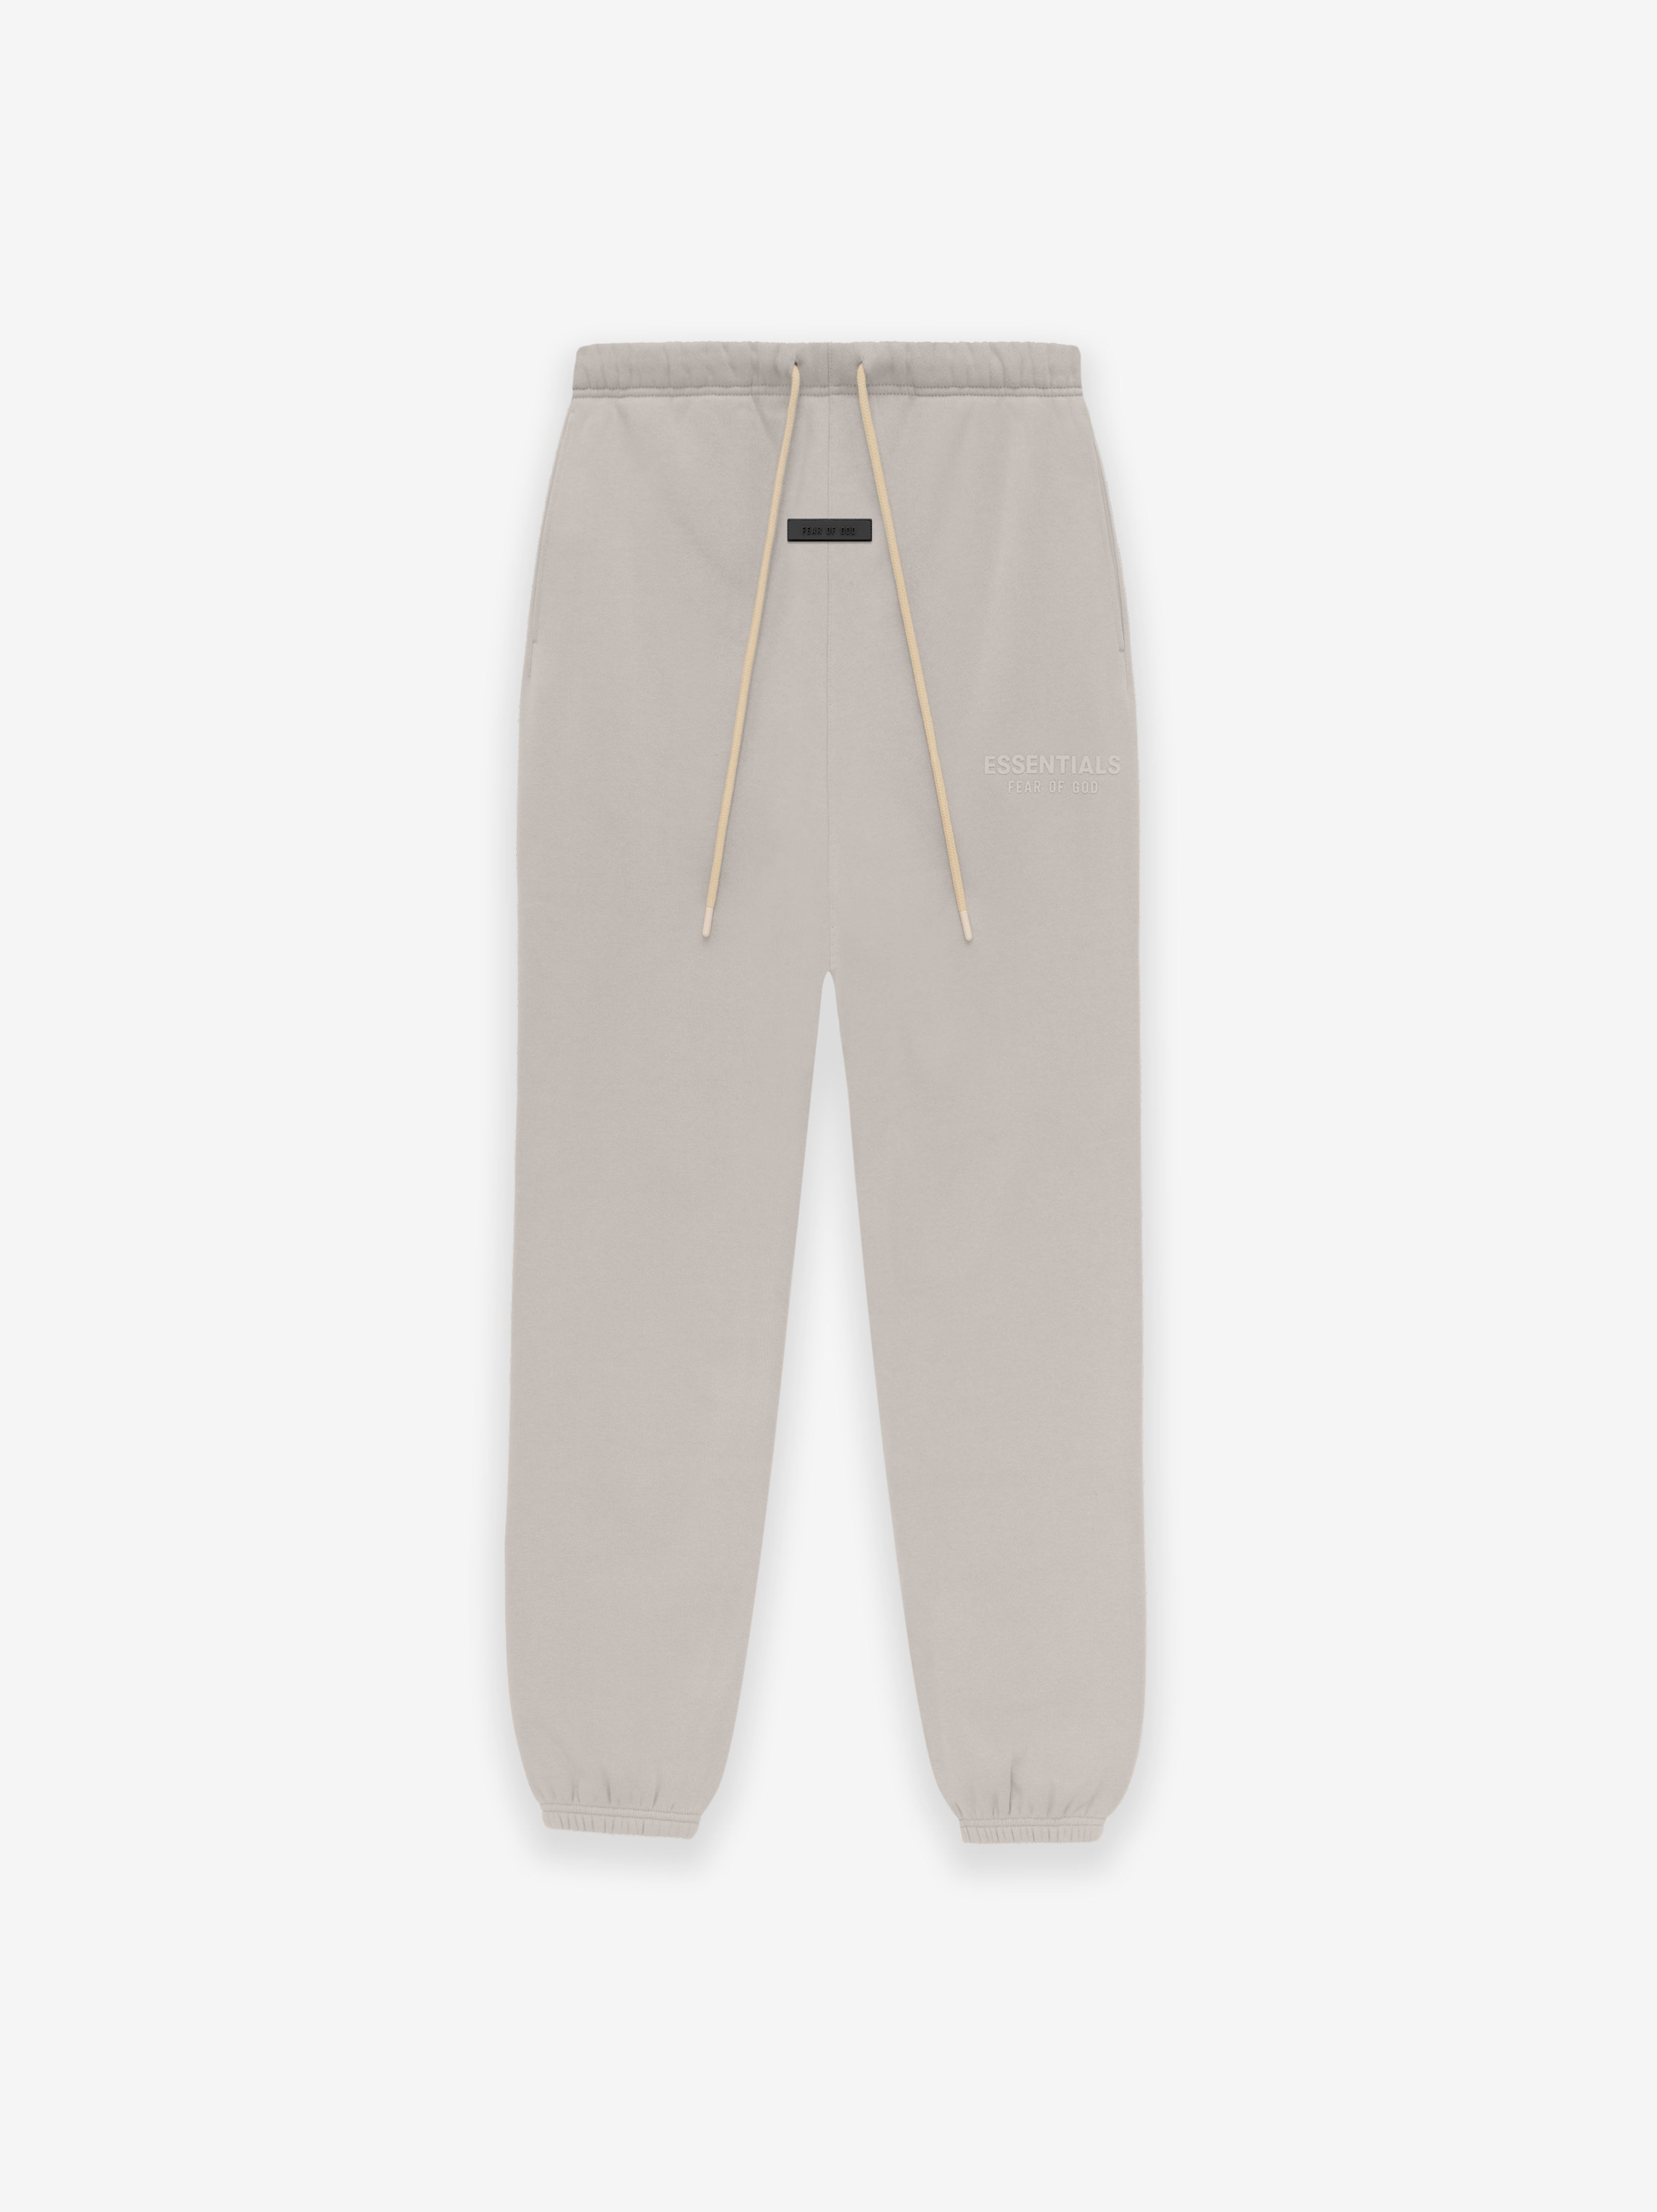 Fear of God Essentials Sweatpants (SS20) Gray Flannel/Charcoal